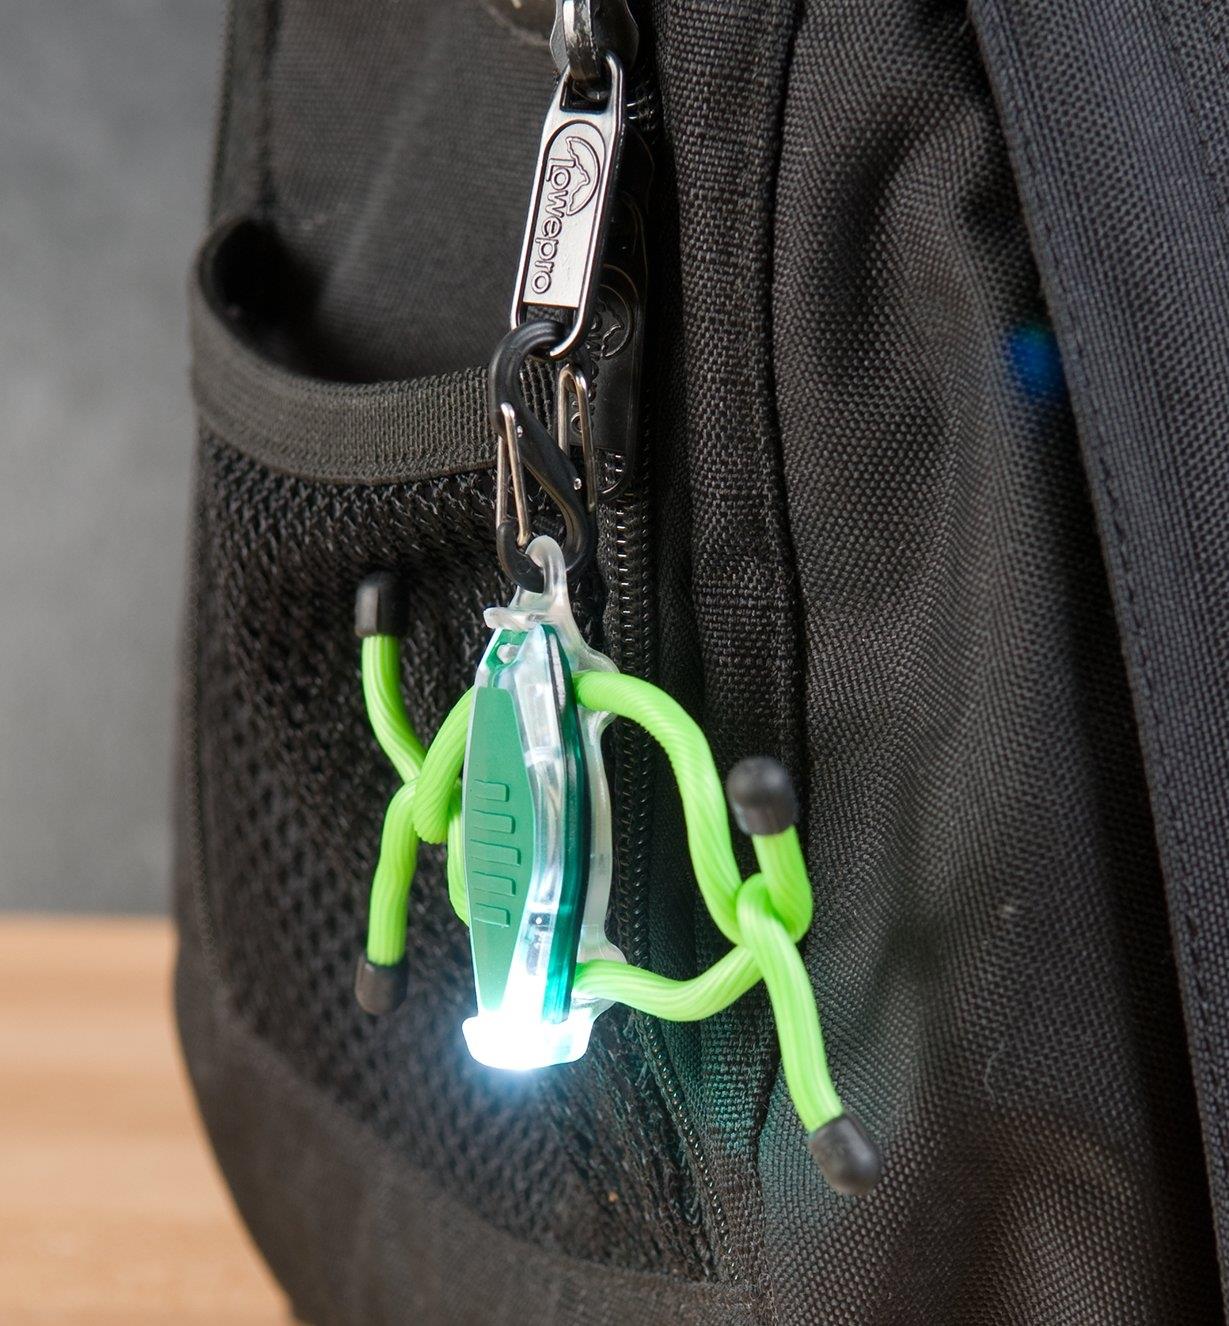 A Green BugLit LED Micro-Light attached to a backpack zipper pull